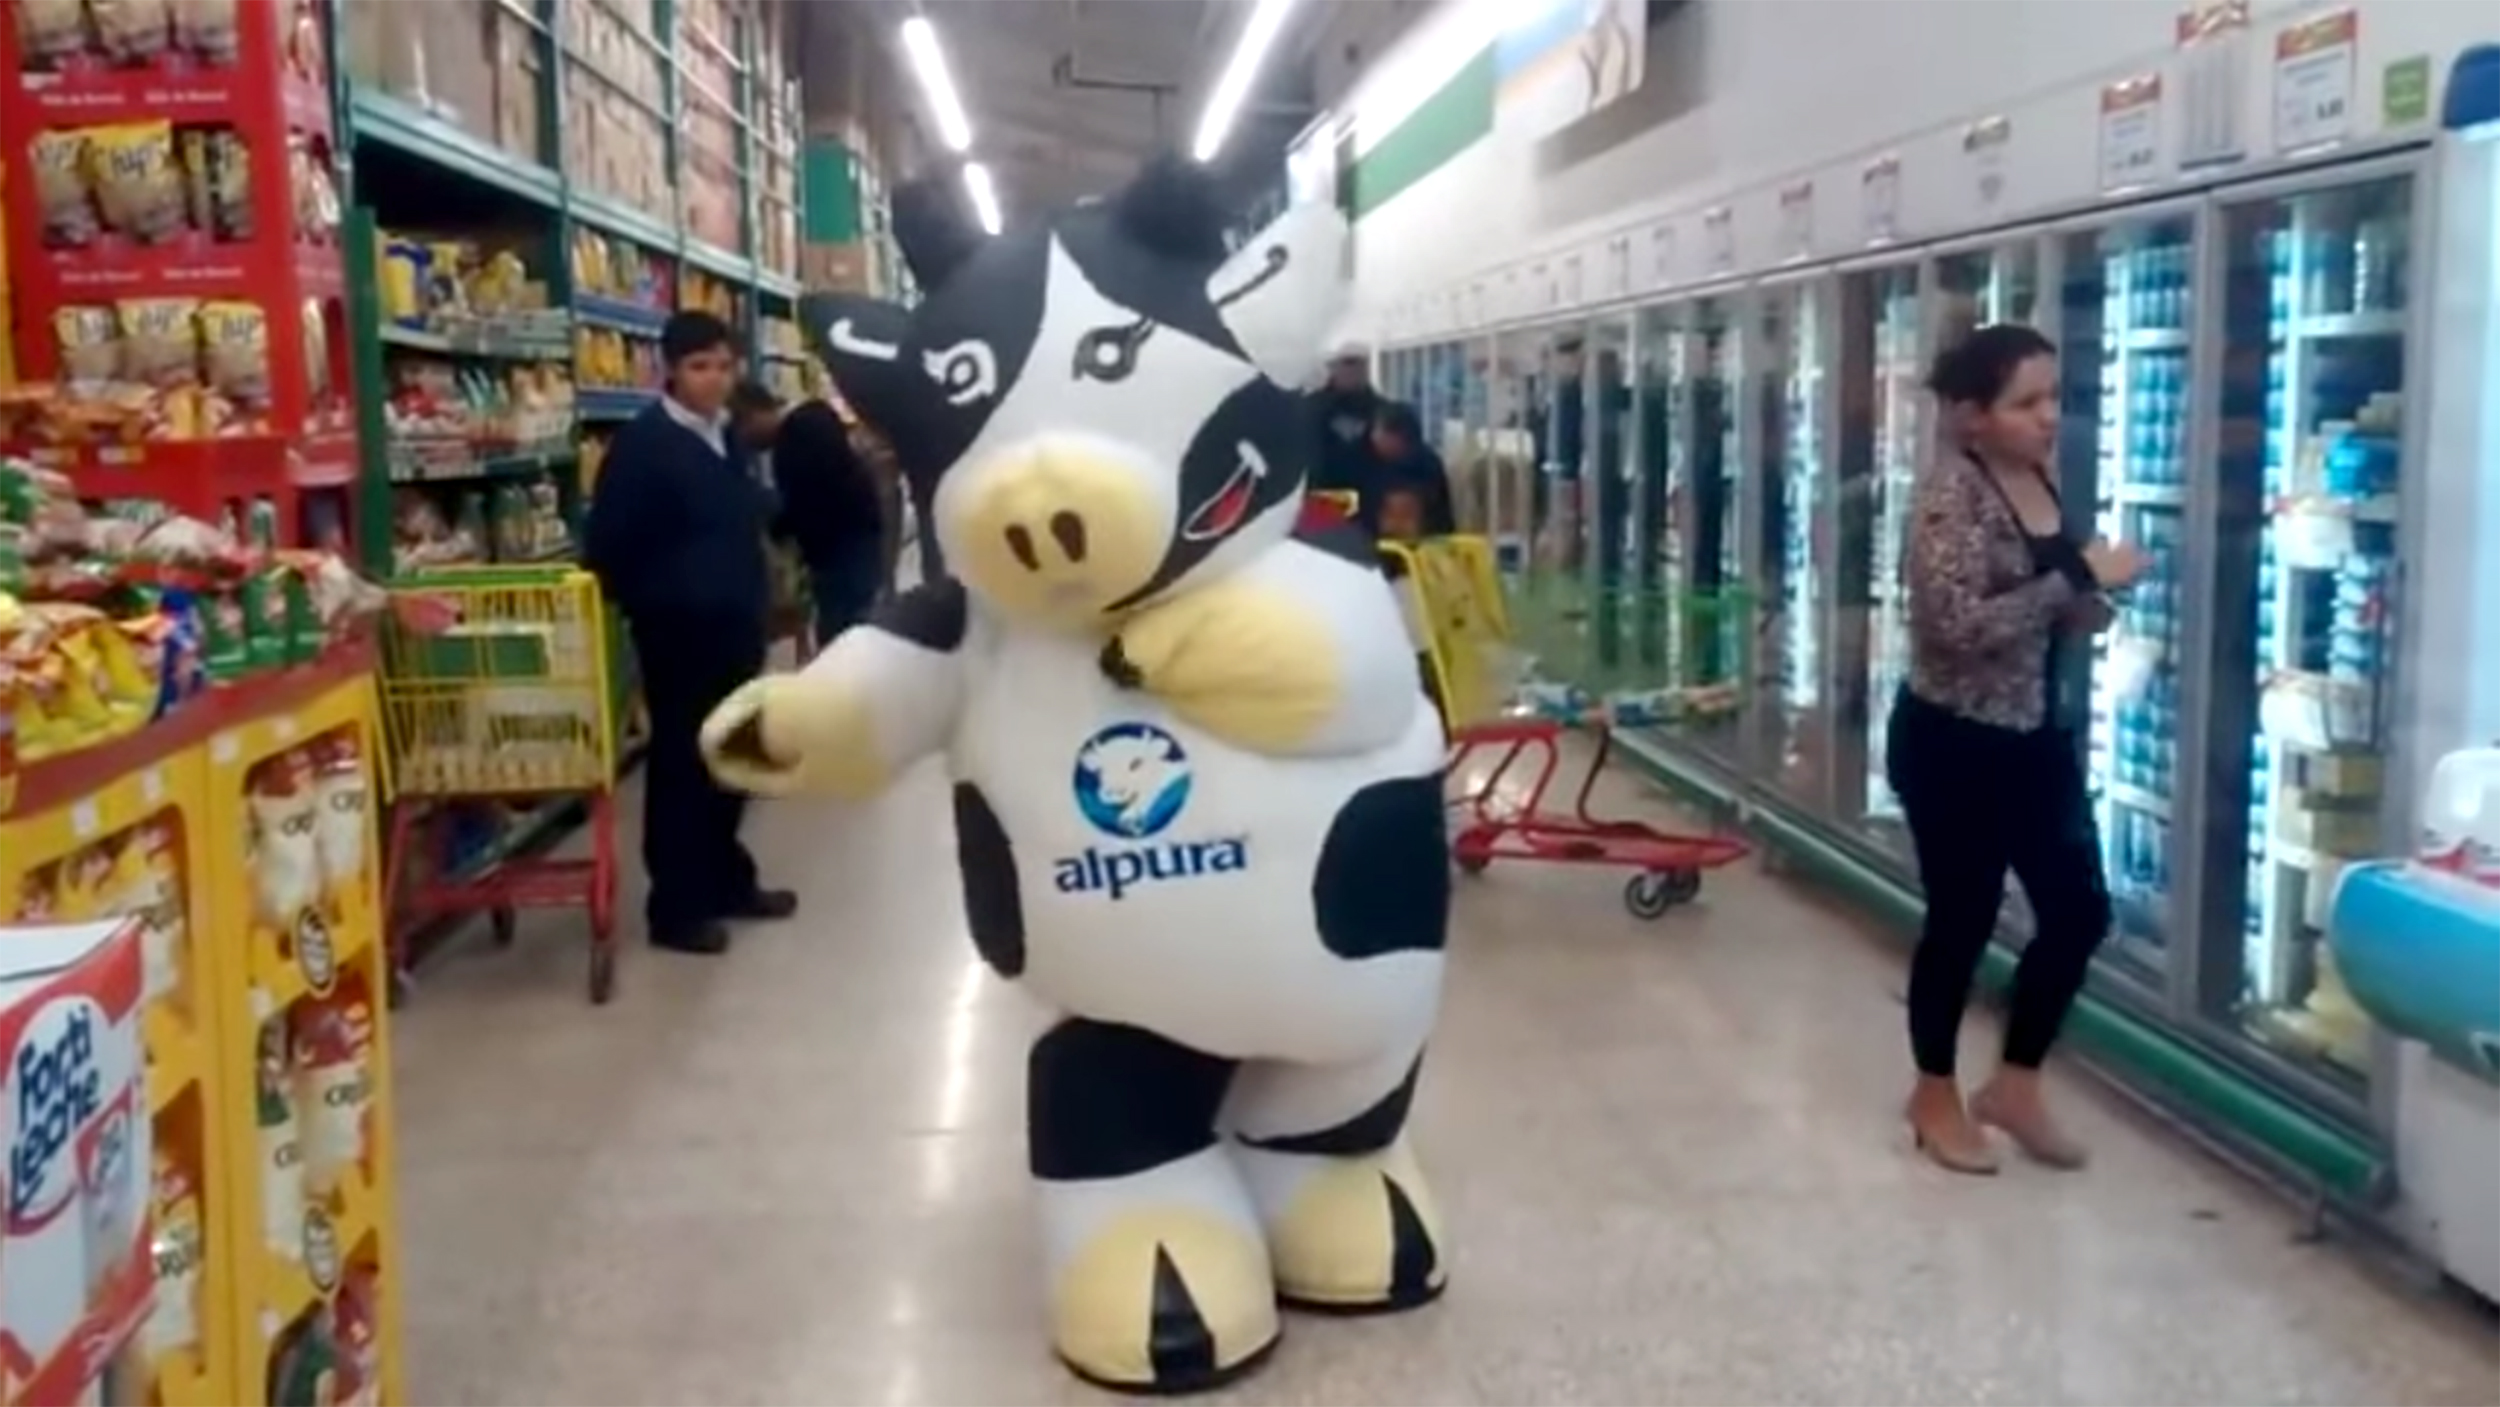 Dancers in inflatable-cow costumes bust a move in Mexican supermarkets